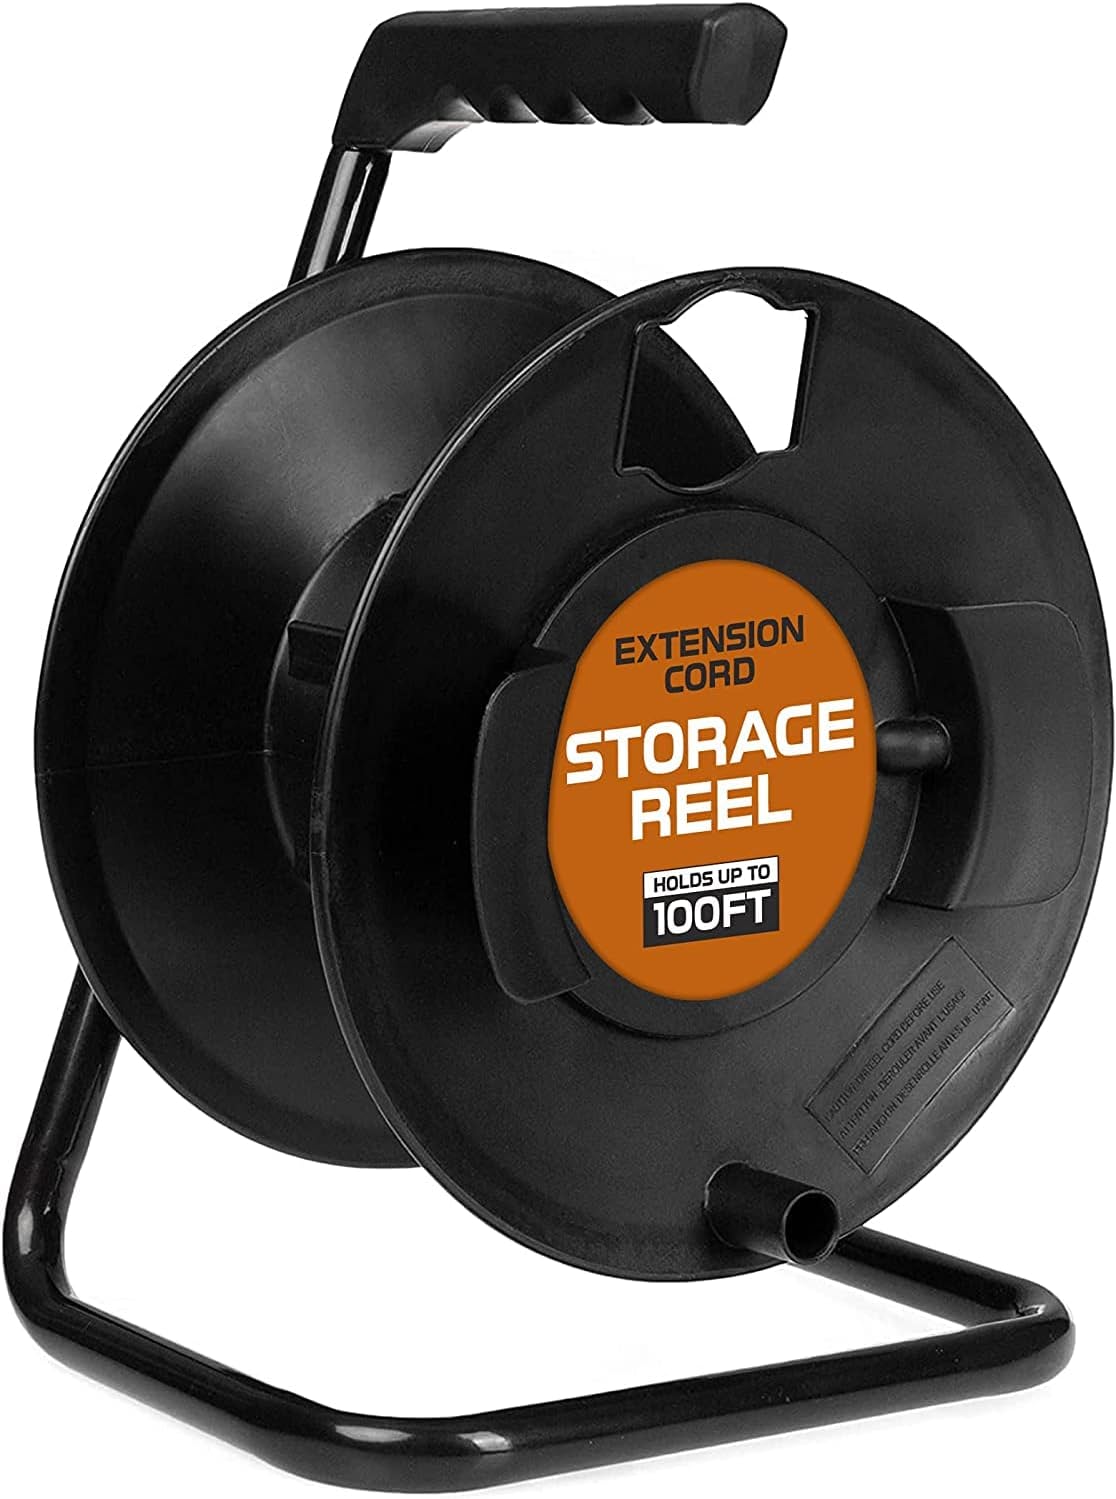 Iron Forge Extension Cord Storage Reel-Metal Stand, Black